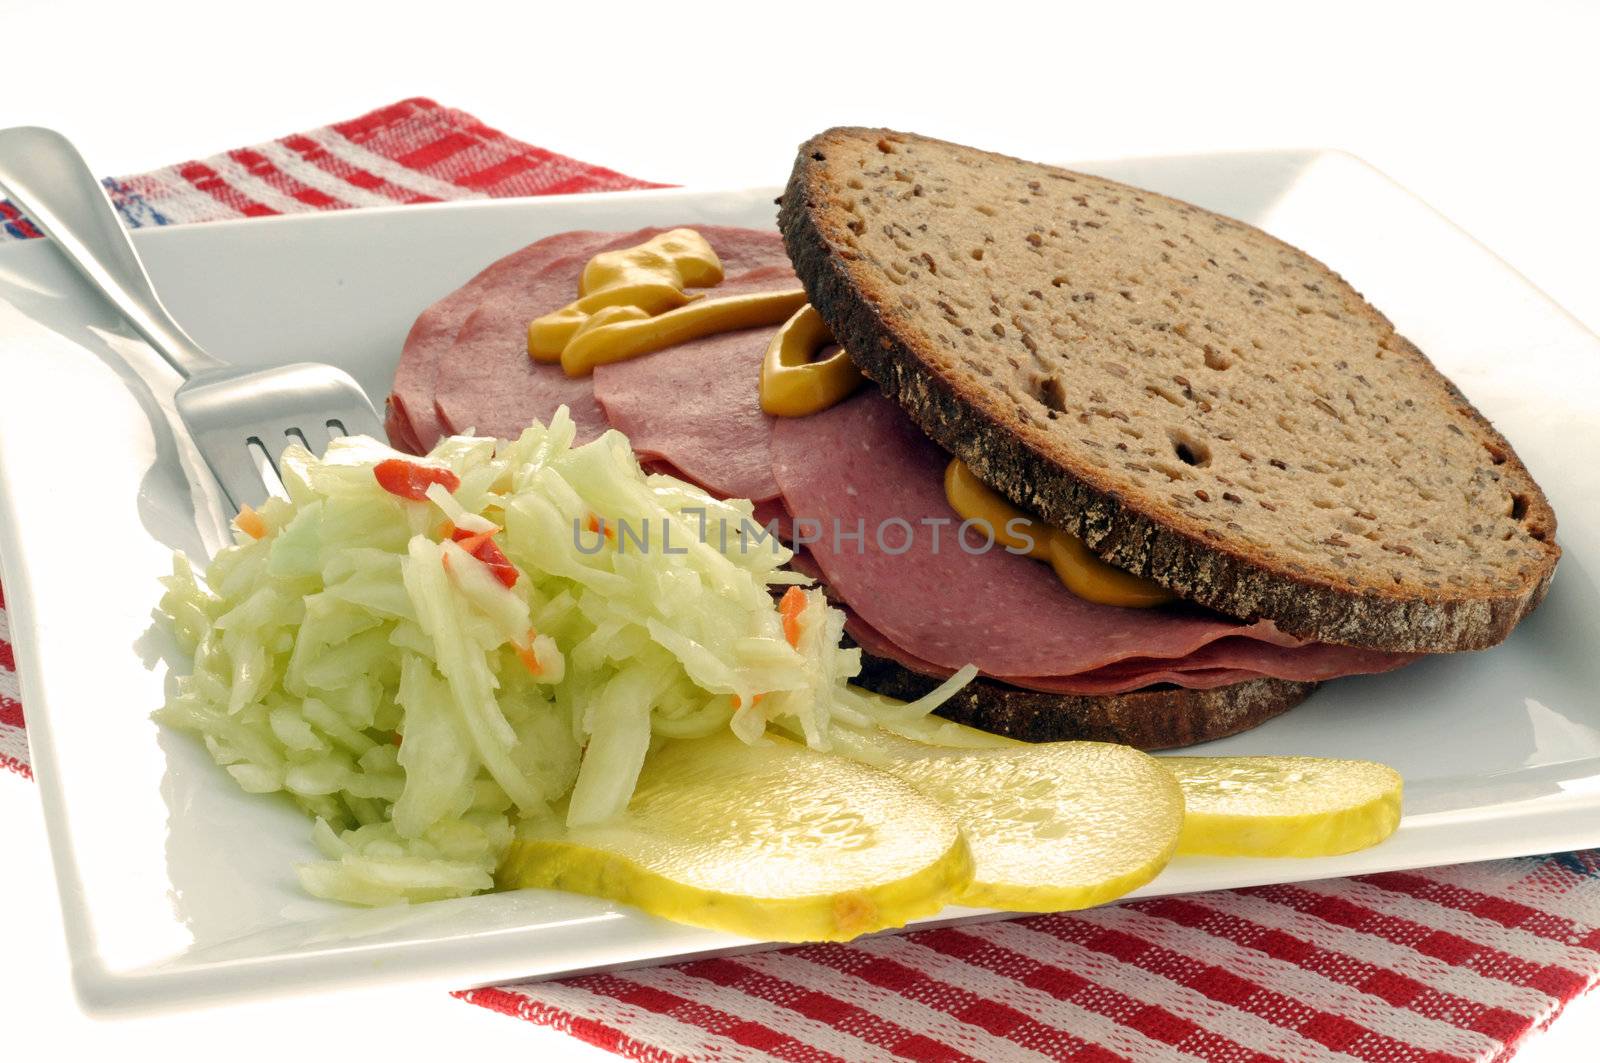 Coleslaw and pickles accompanying a deli sandwich.